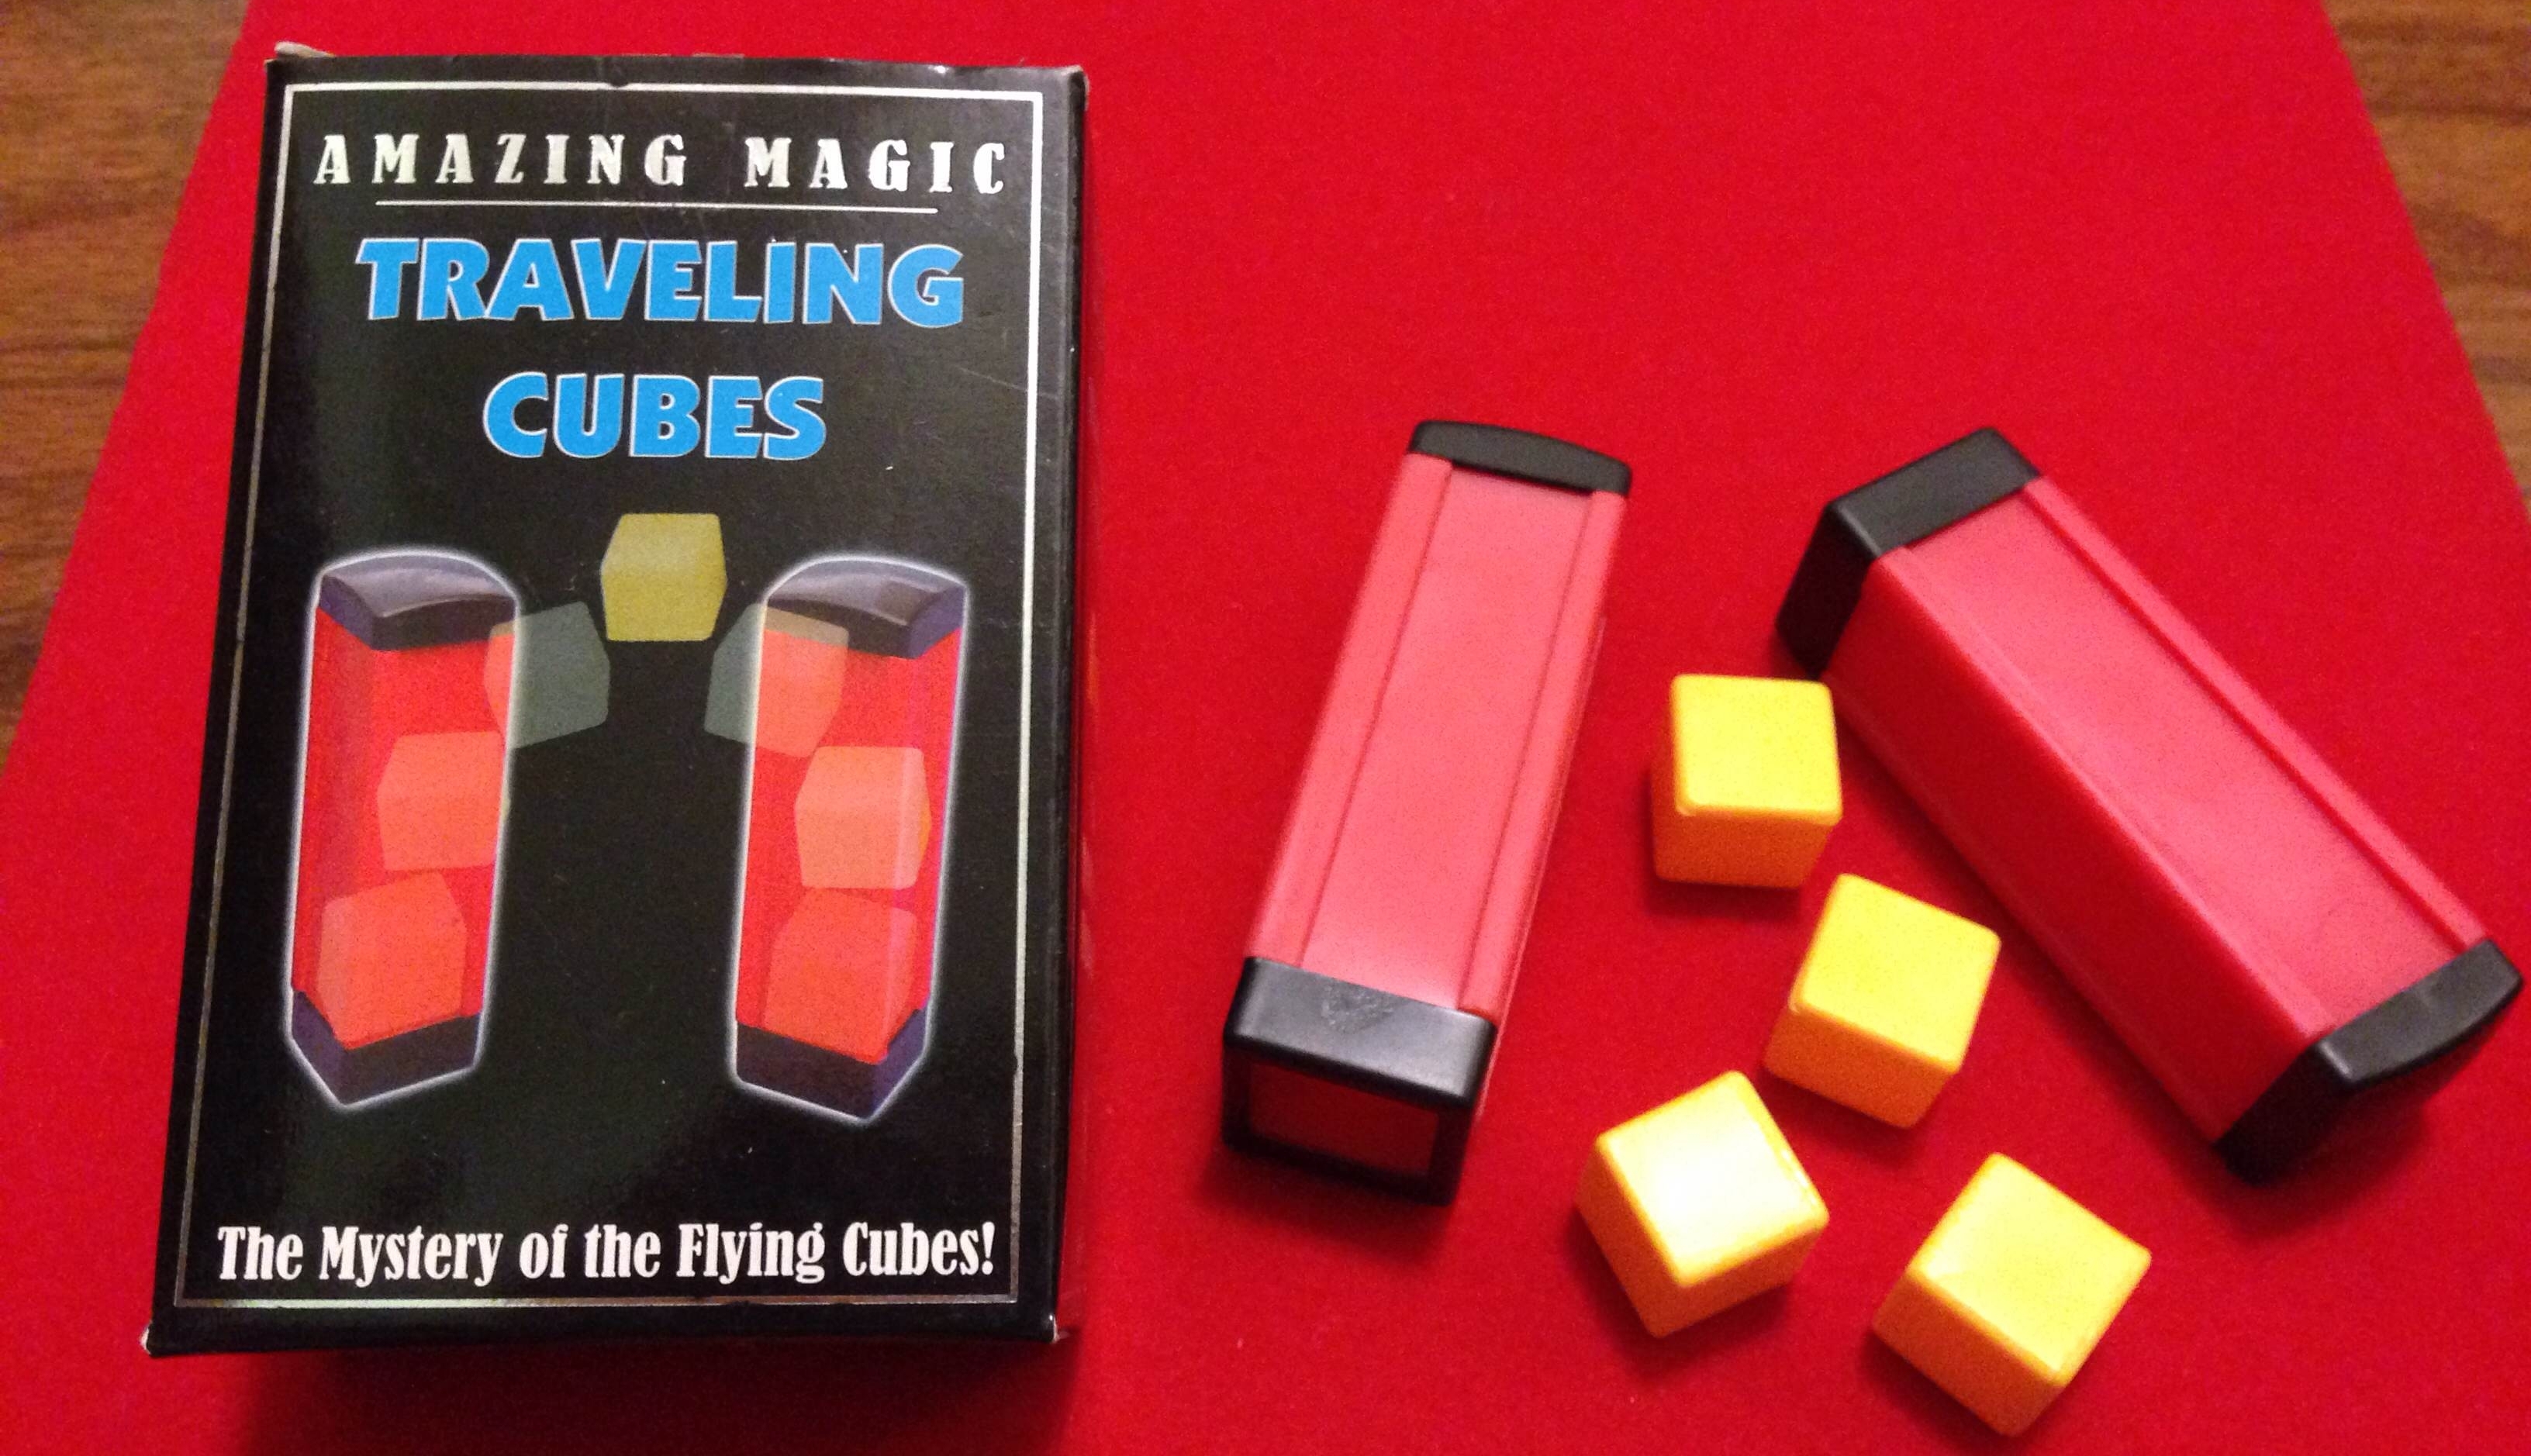 TRAVELING CUBES